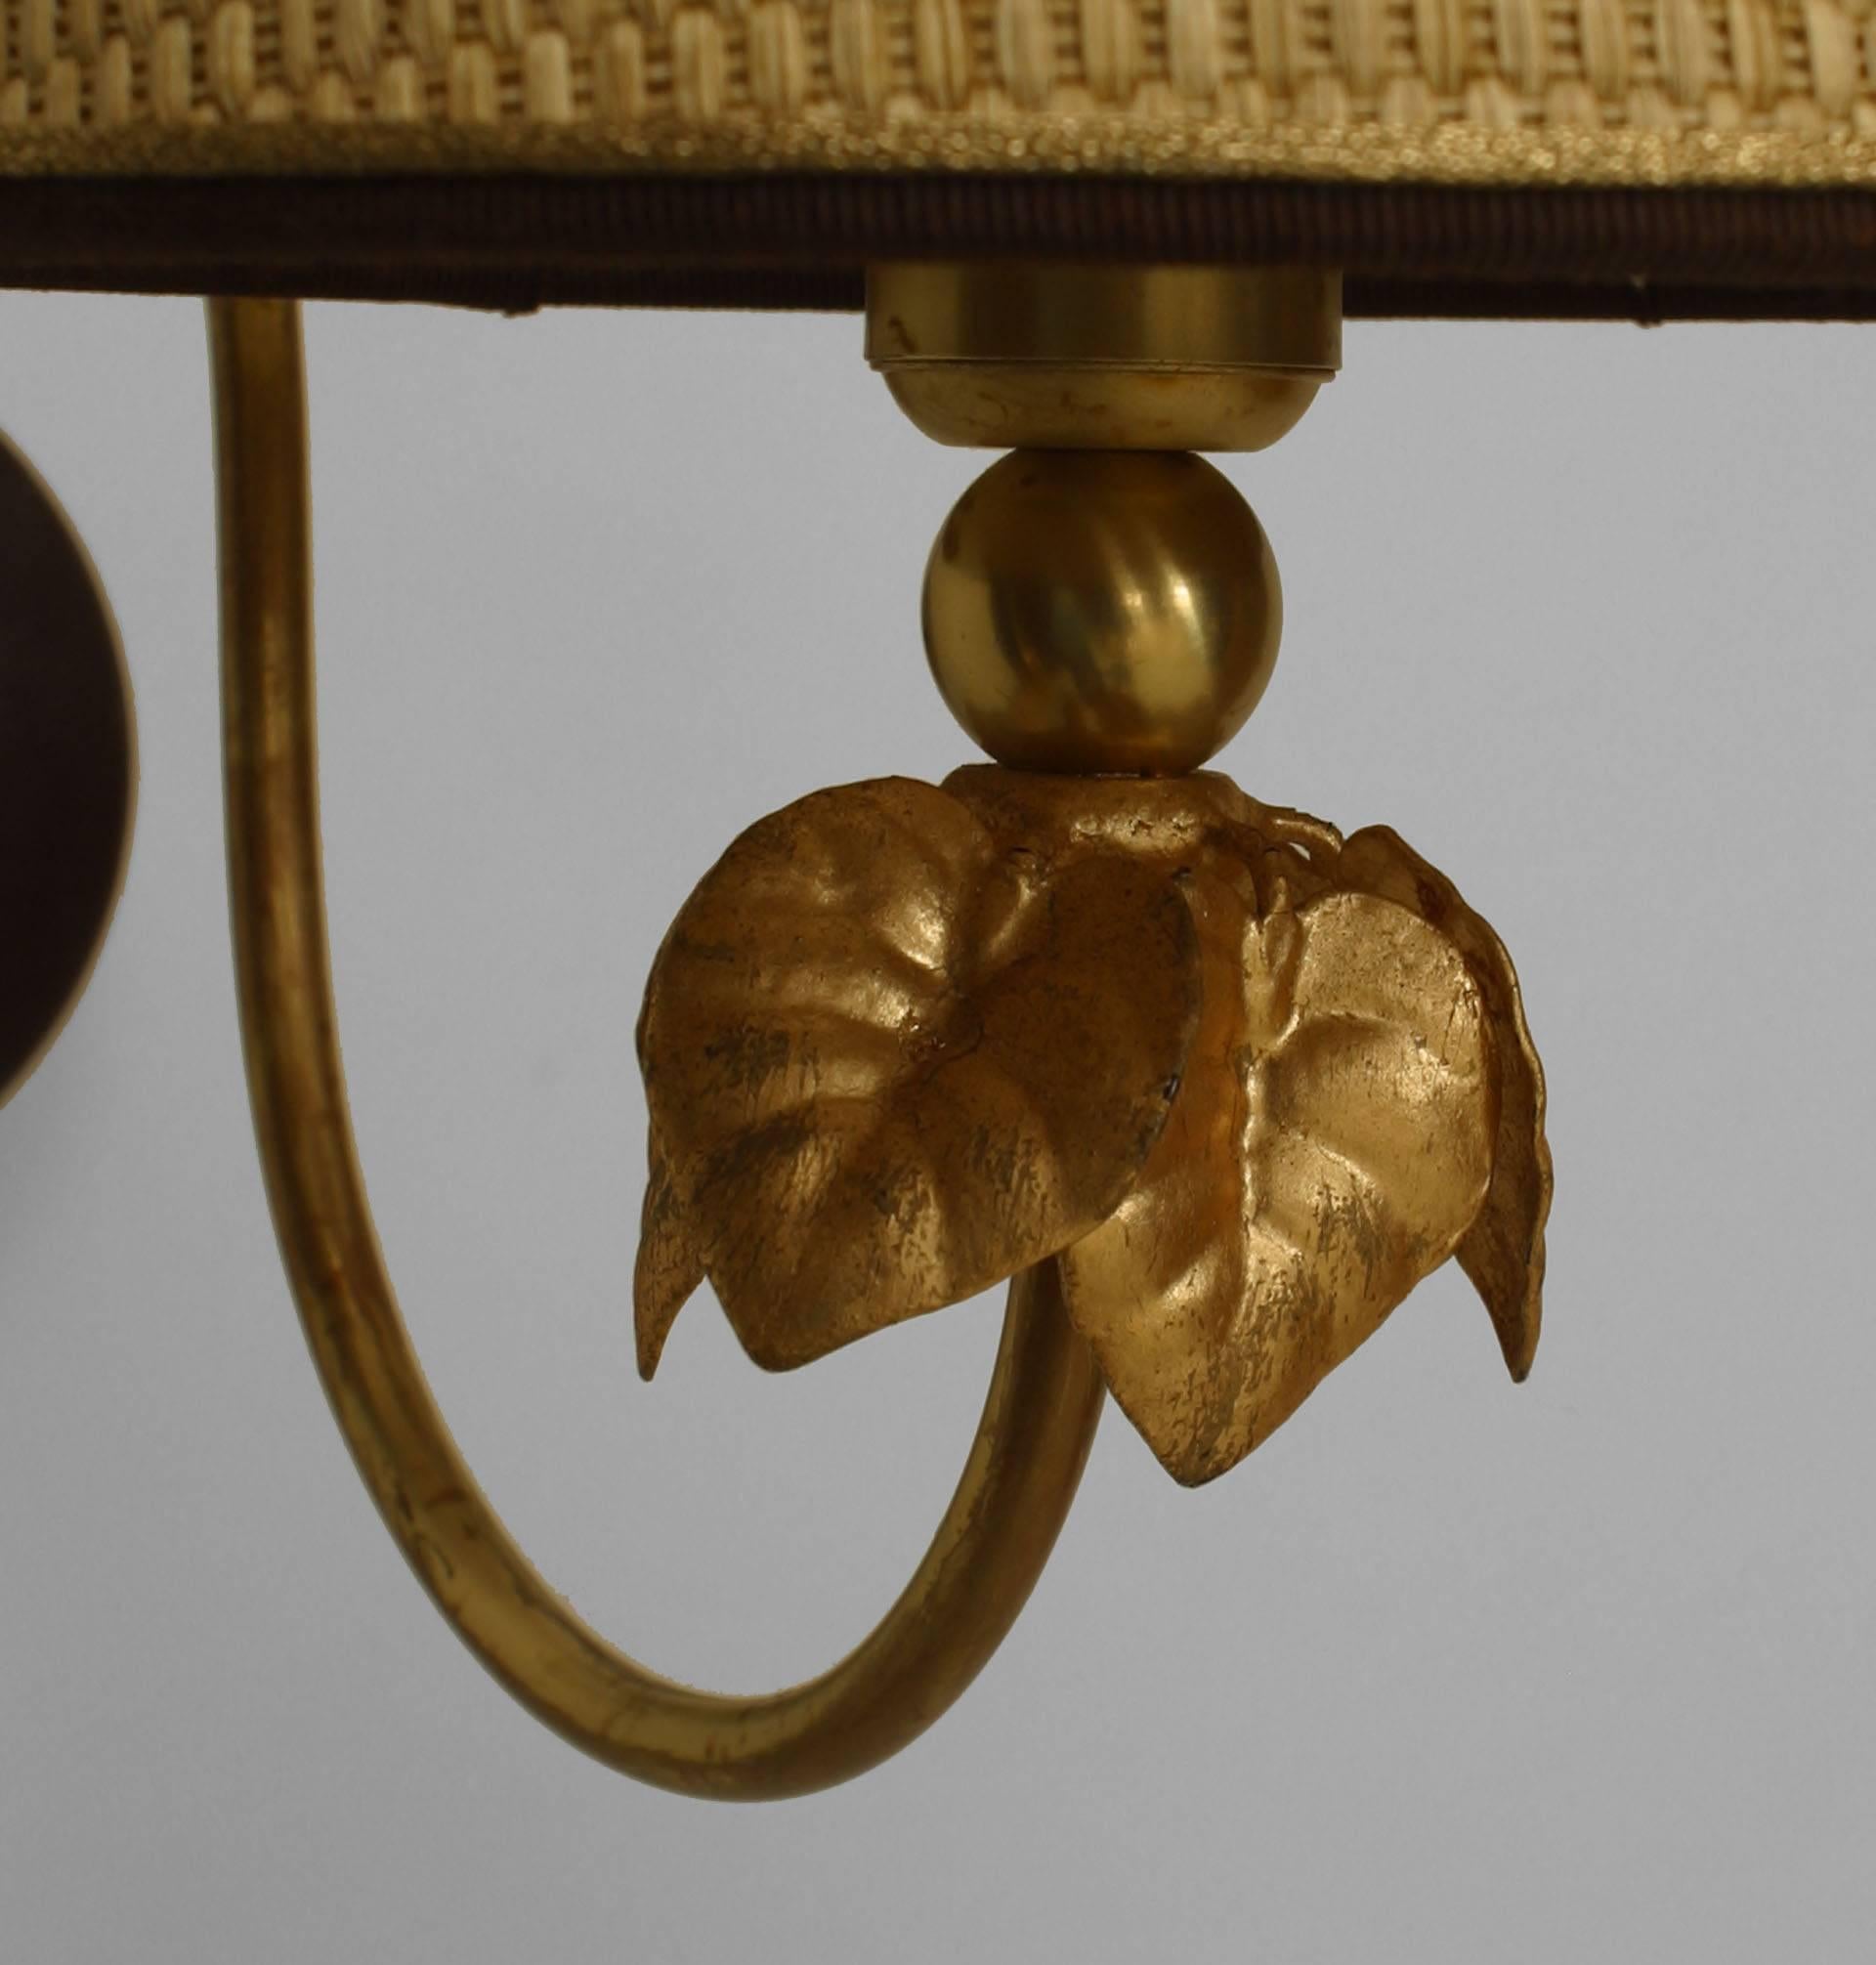 Two pairs of Italian 1940s gilt metal swing arm wall sconces with leaves cups hold a light with a shade (Per pair).
     
   